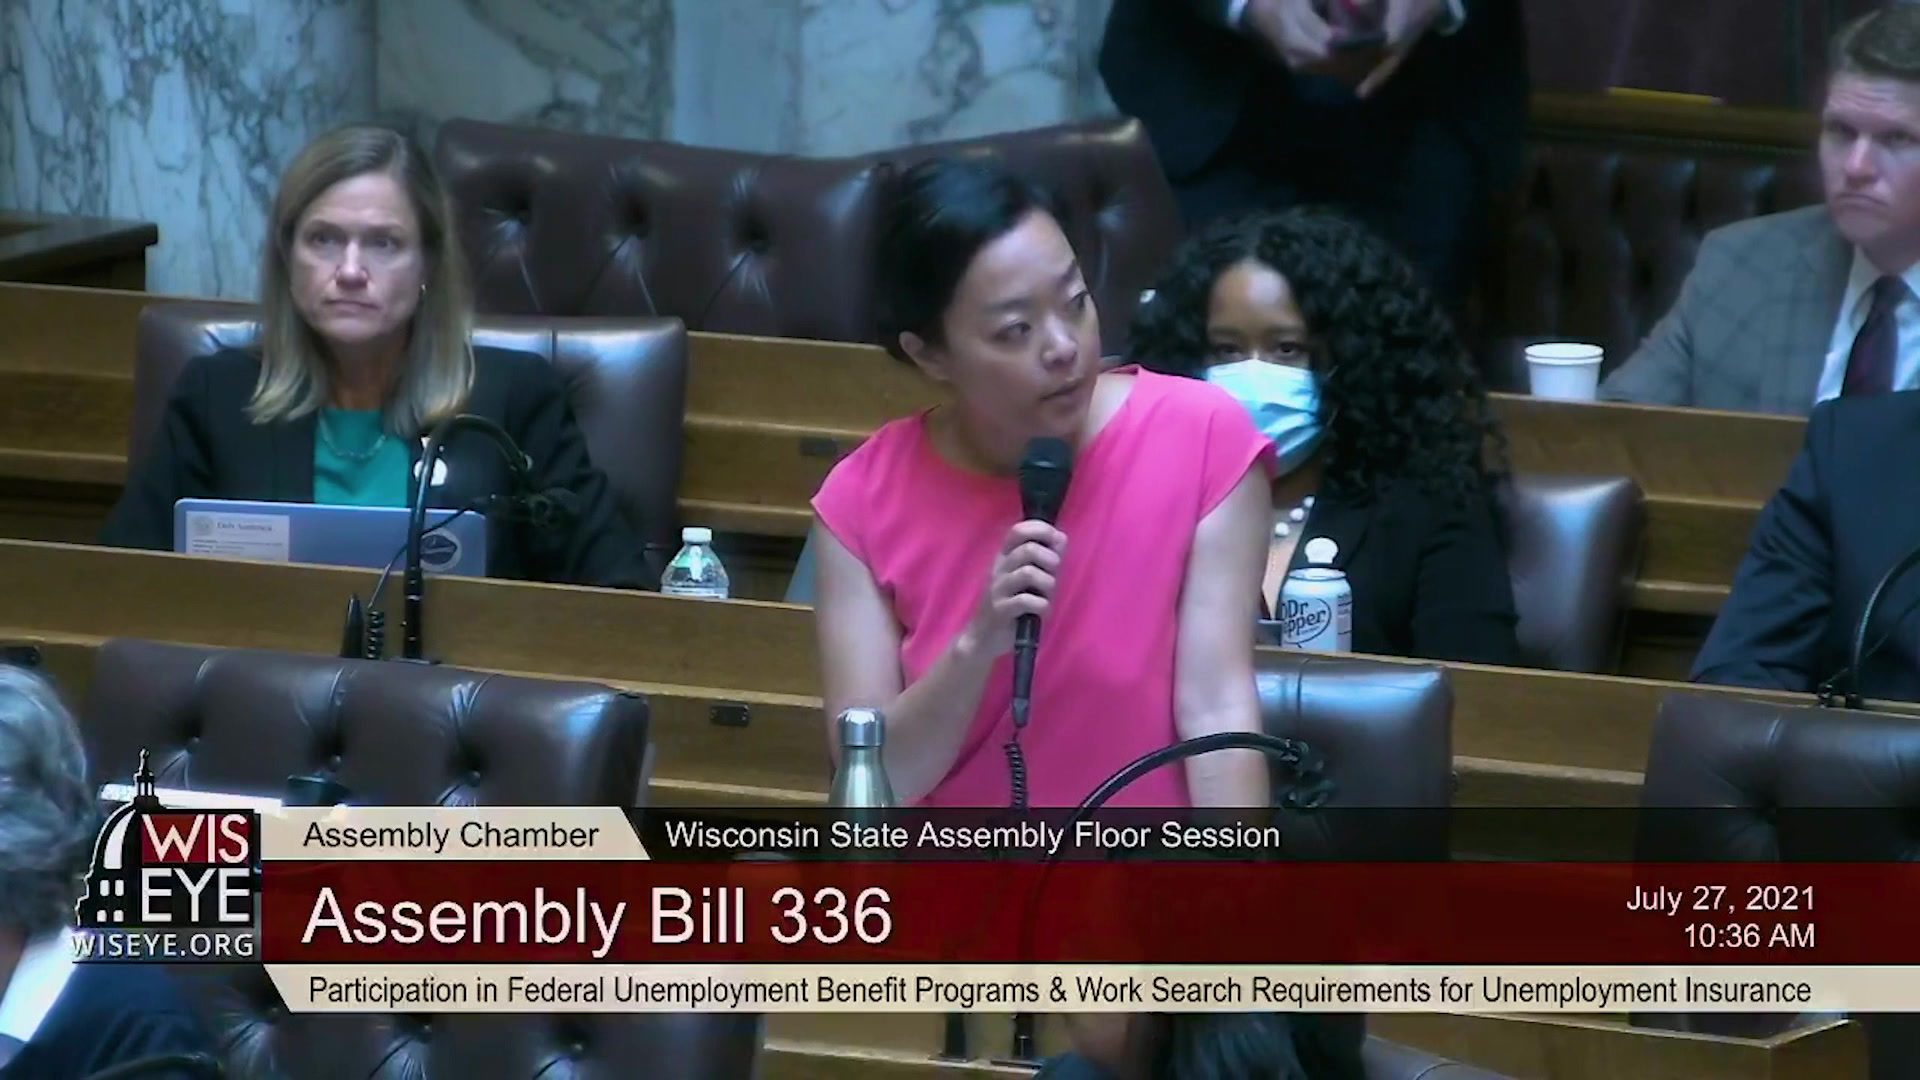 Francesca Hong holds a microphone and speaks in the Wisconsin Assembly chambers.